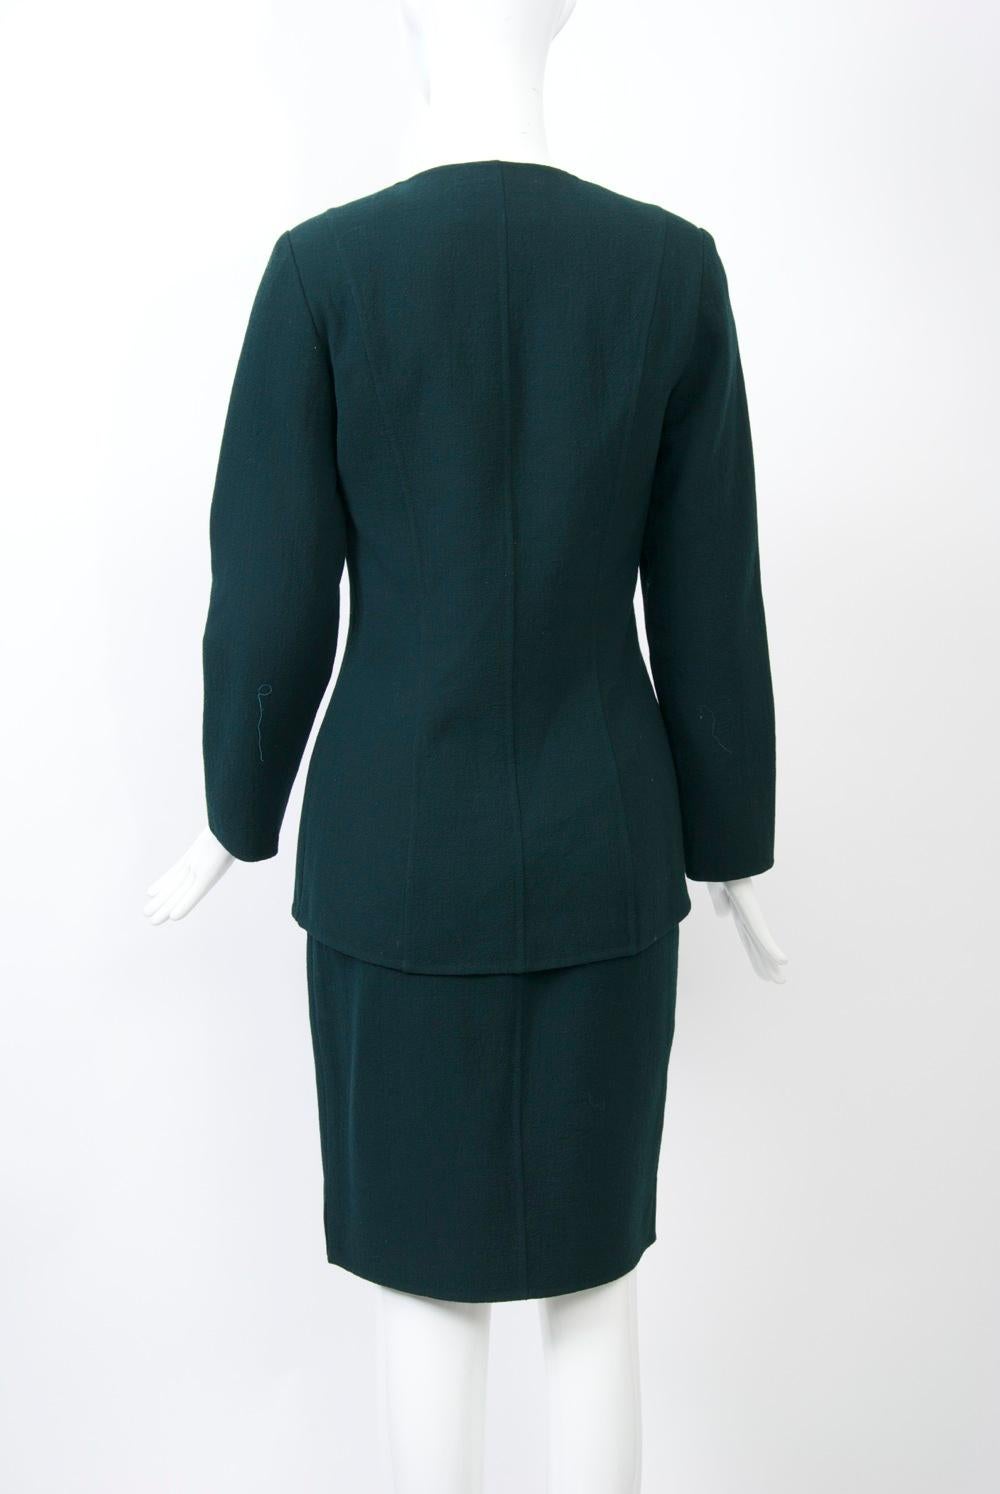 Black Geoffrey Beene Forest Green Suit For Sale